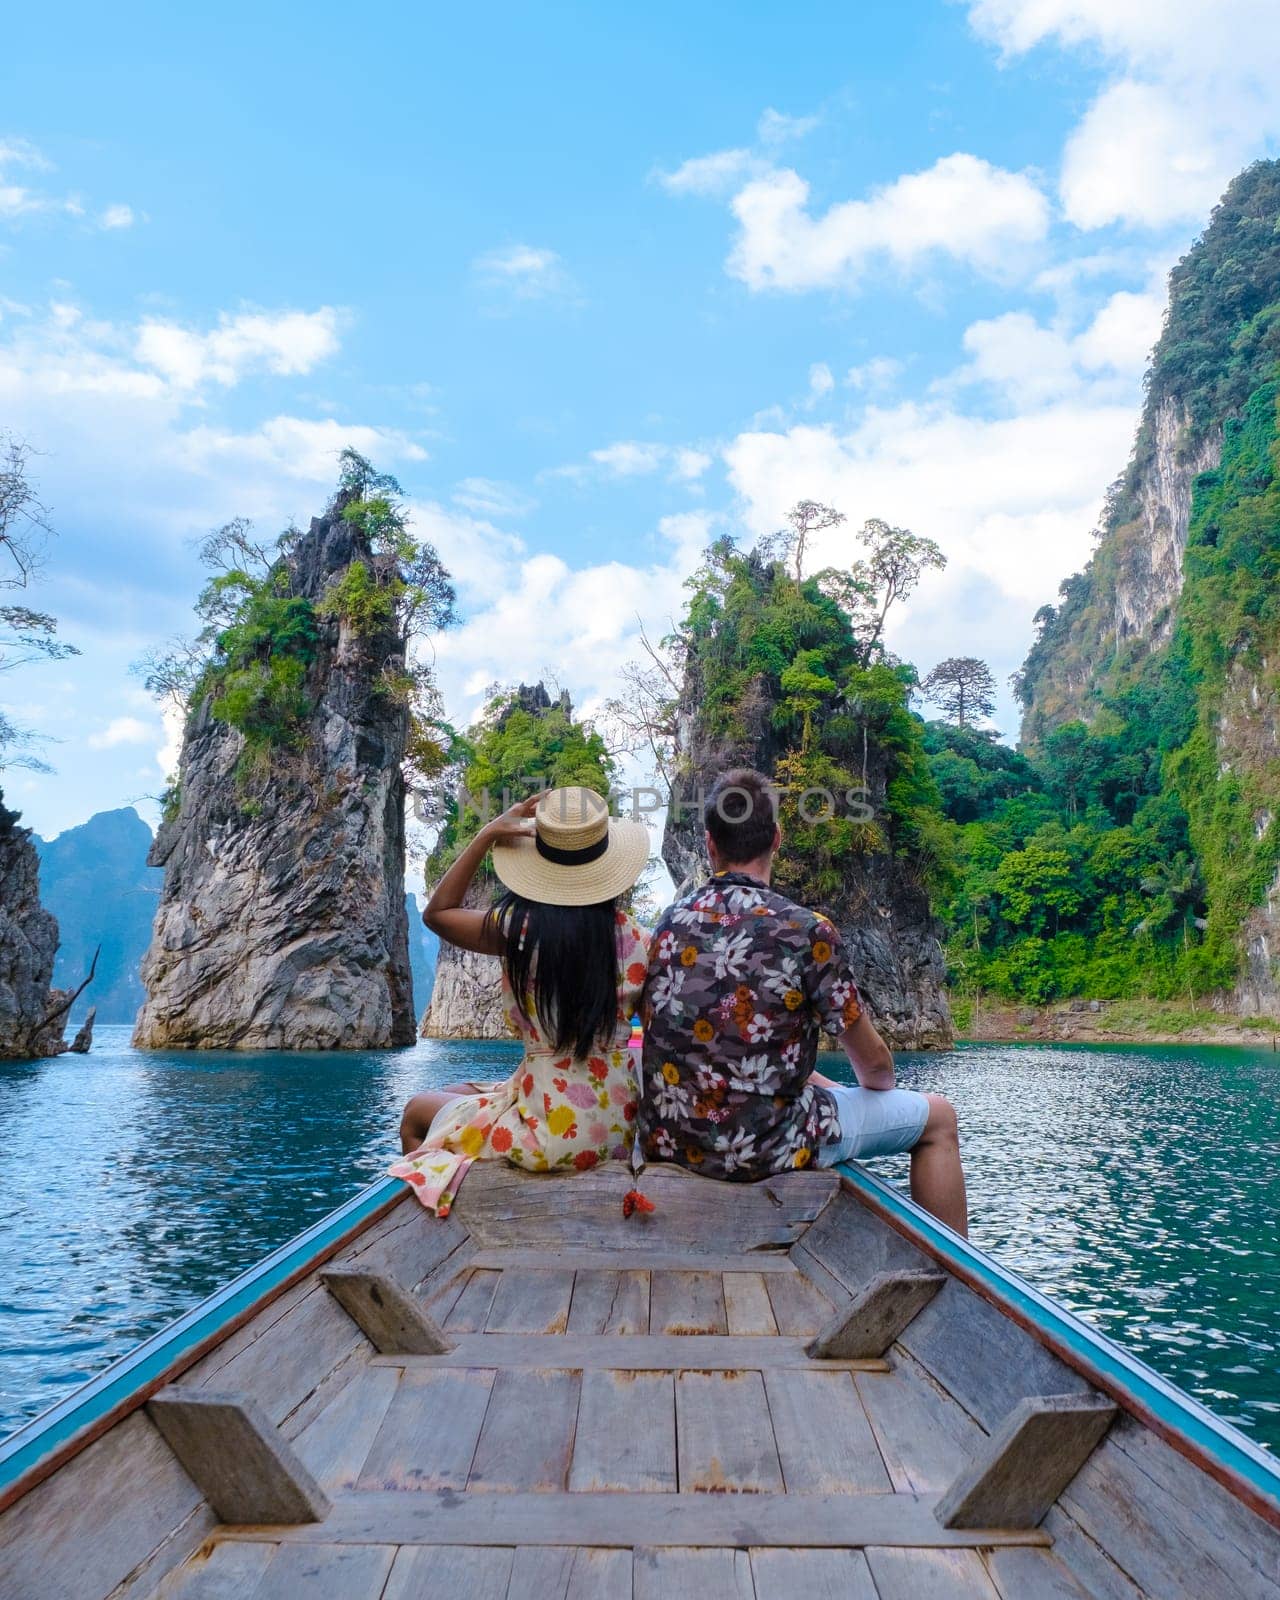 A couple of men and women in front of a longtail boat in Khao Sok Thailand, Scenic mountains on the lake in Khao Sok National Park South East Asia